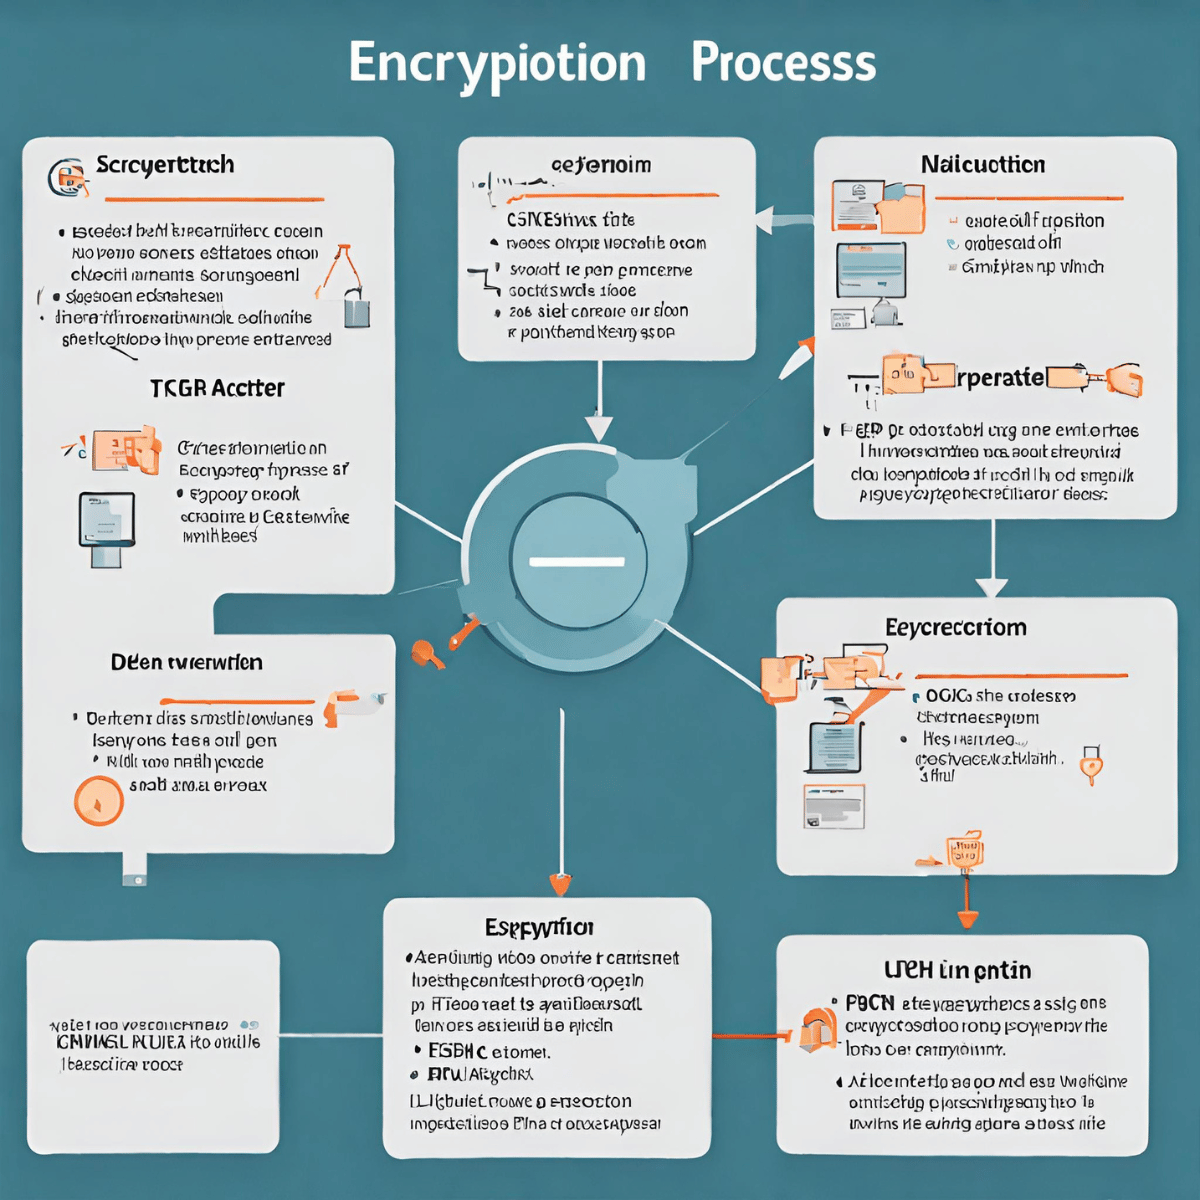 Encryption Process - Data transformation from plaintext to ciphertext.